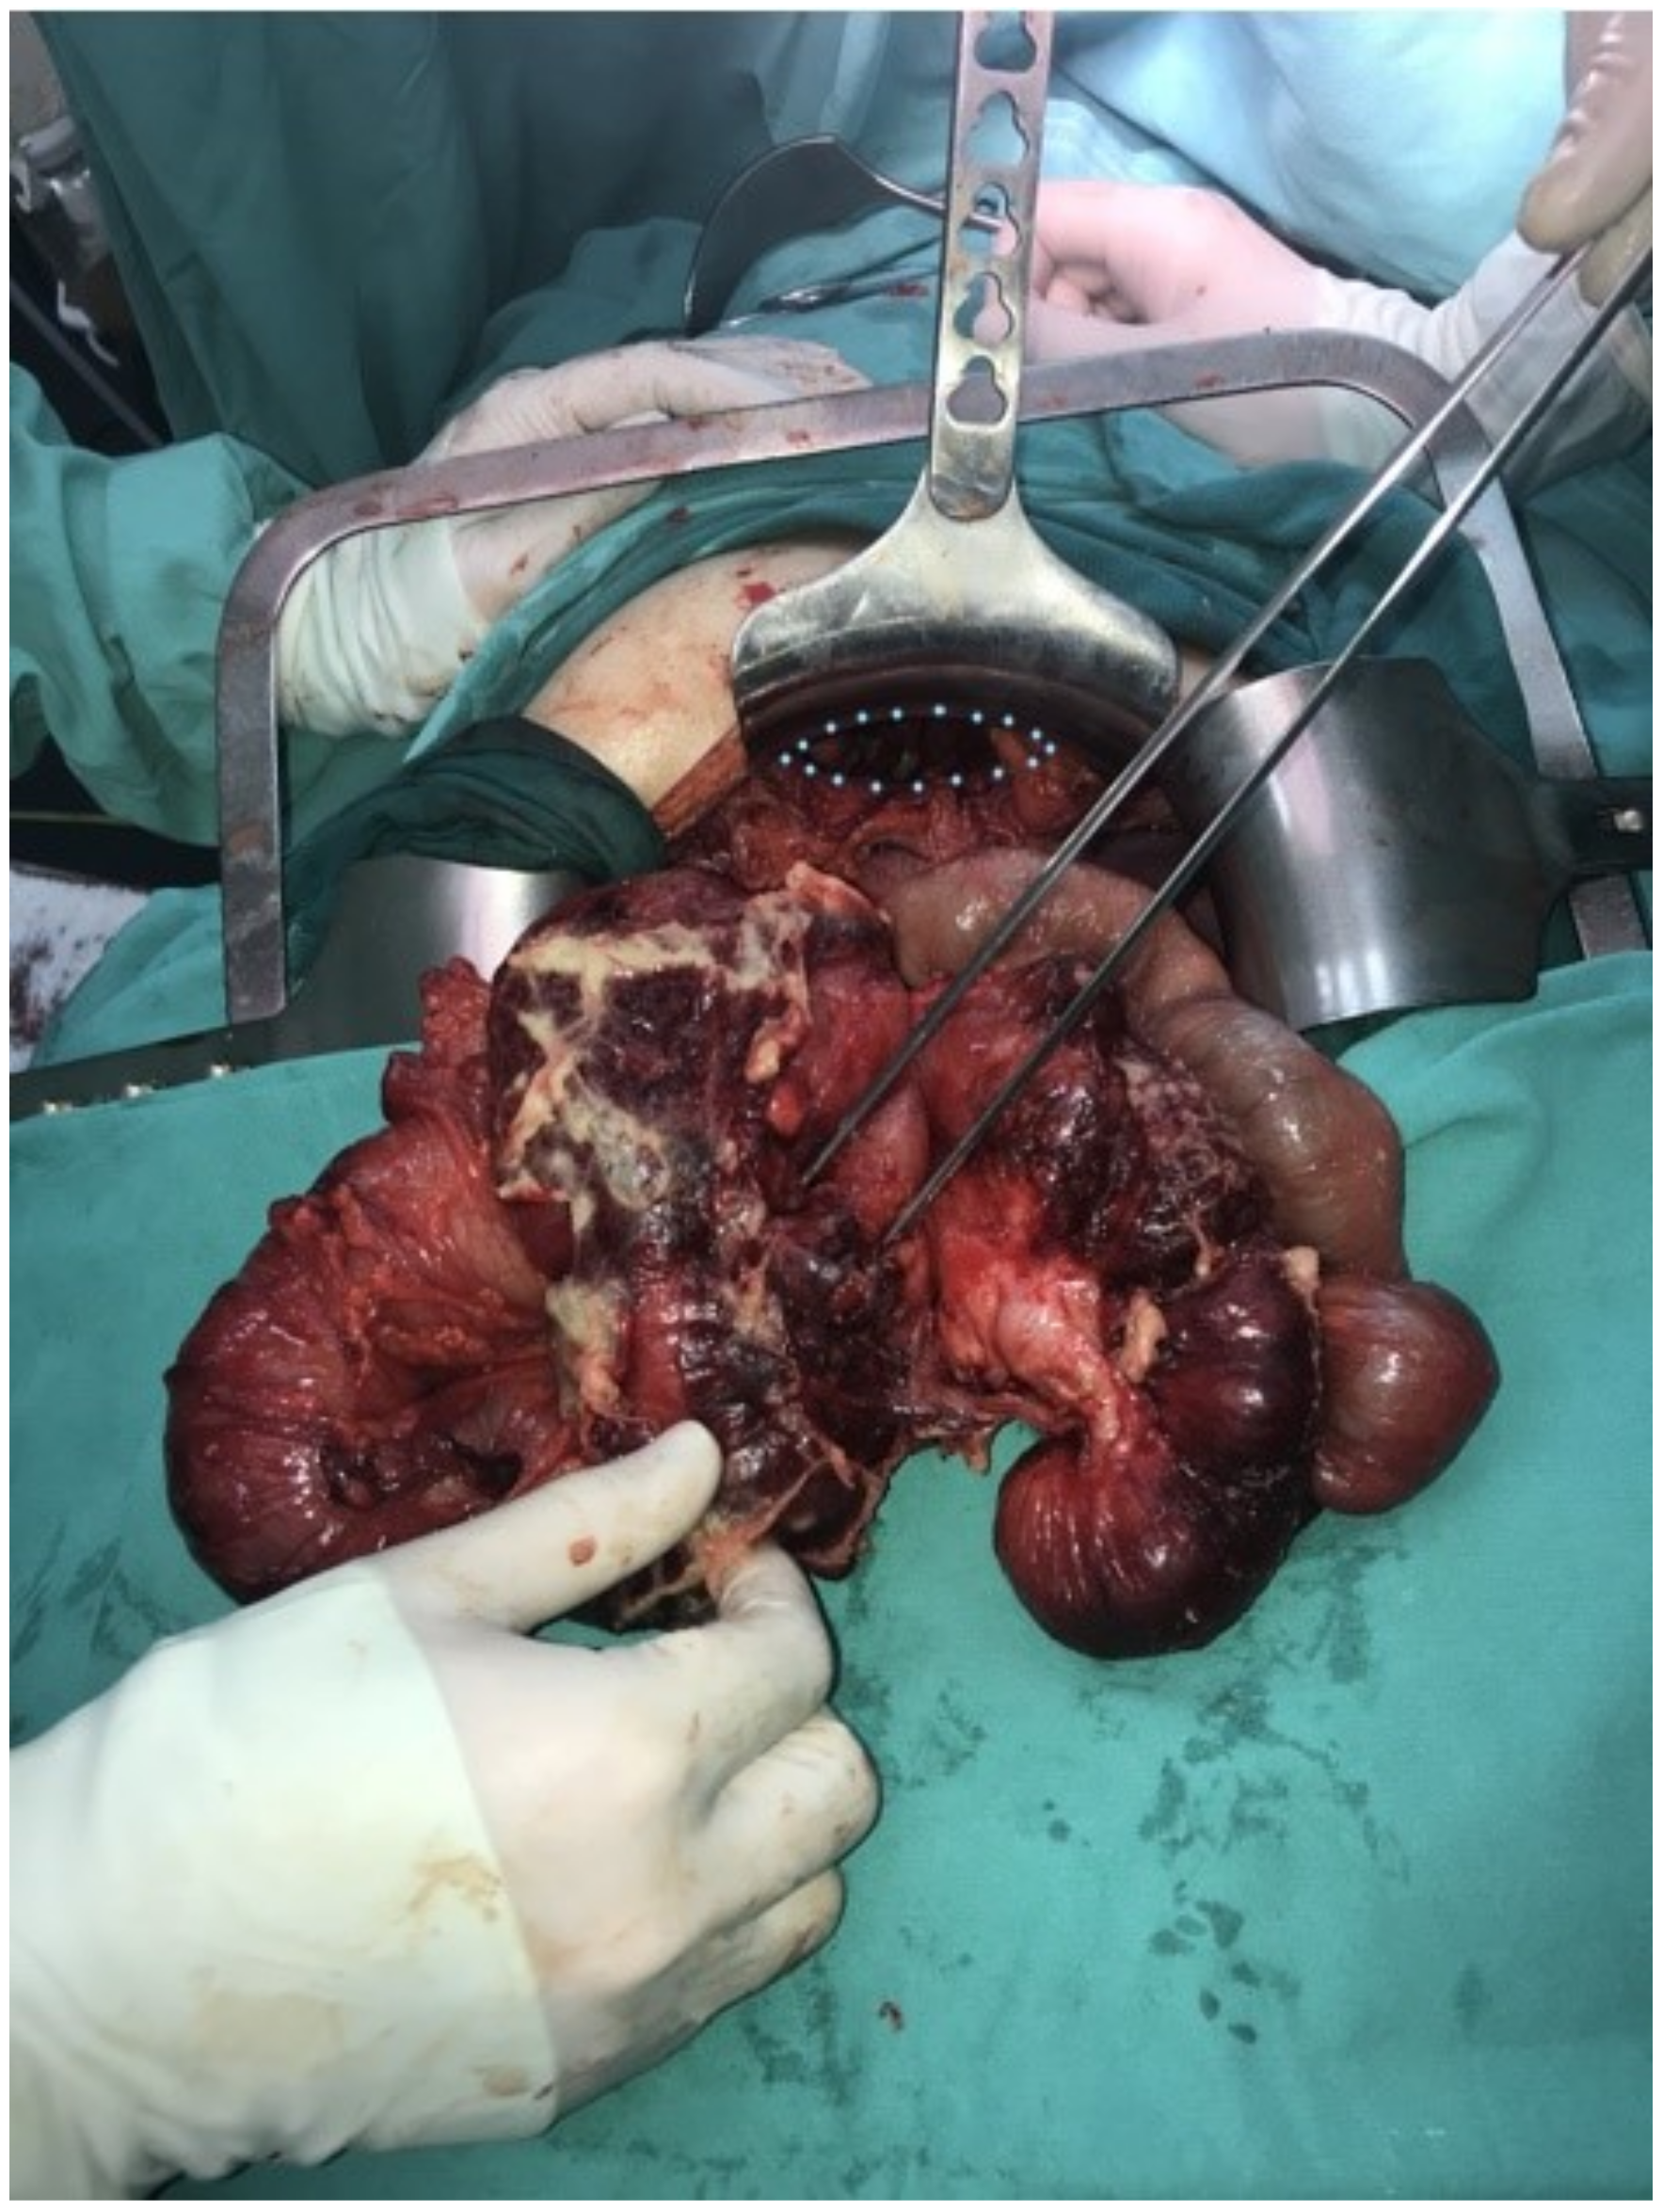 Medicina | Free Full-Text | Perforated Appendicitis and Bowel Incarceration  within Morgagni Hernia: A Case Report